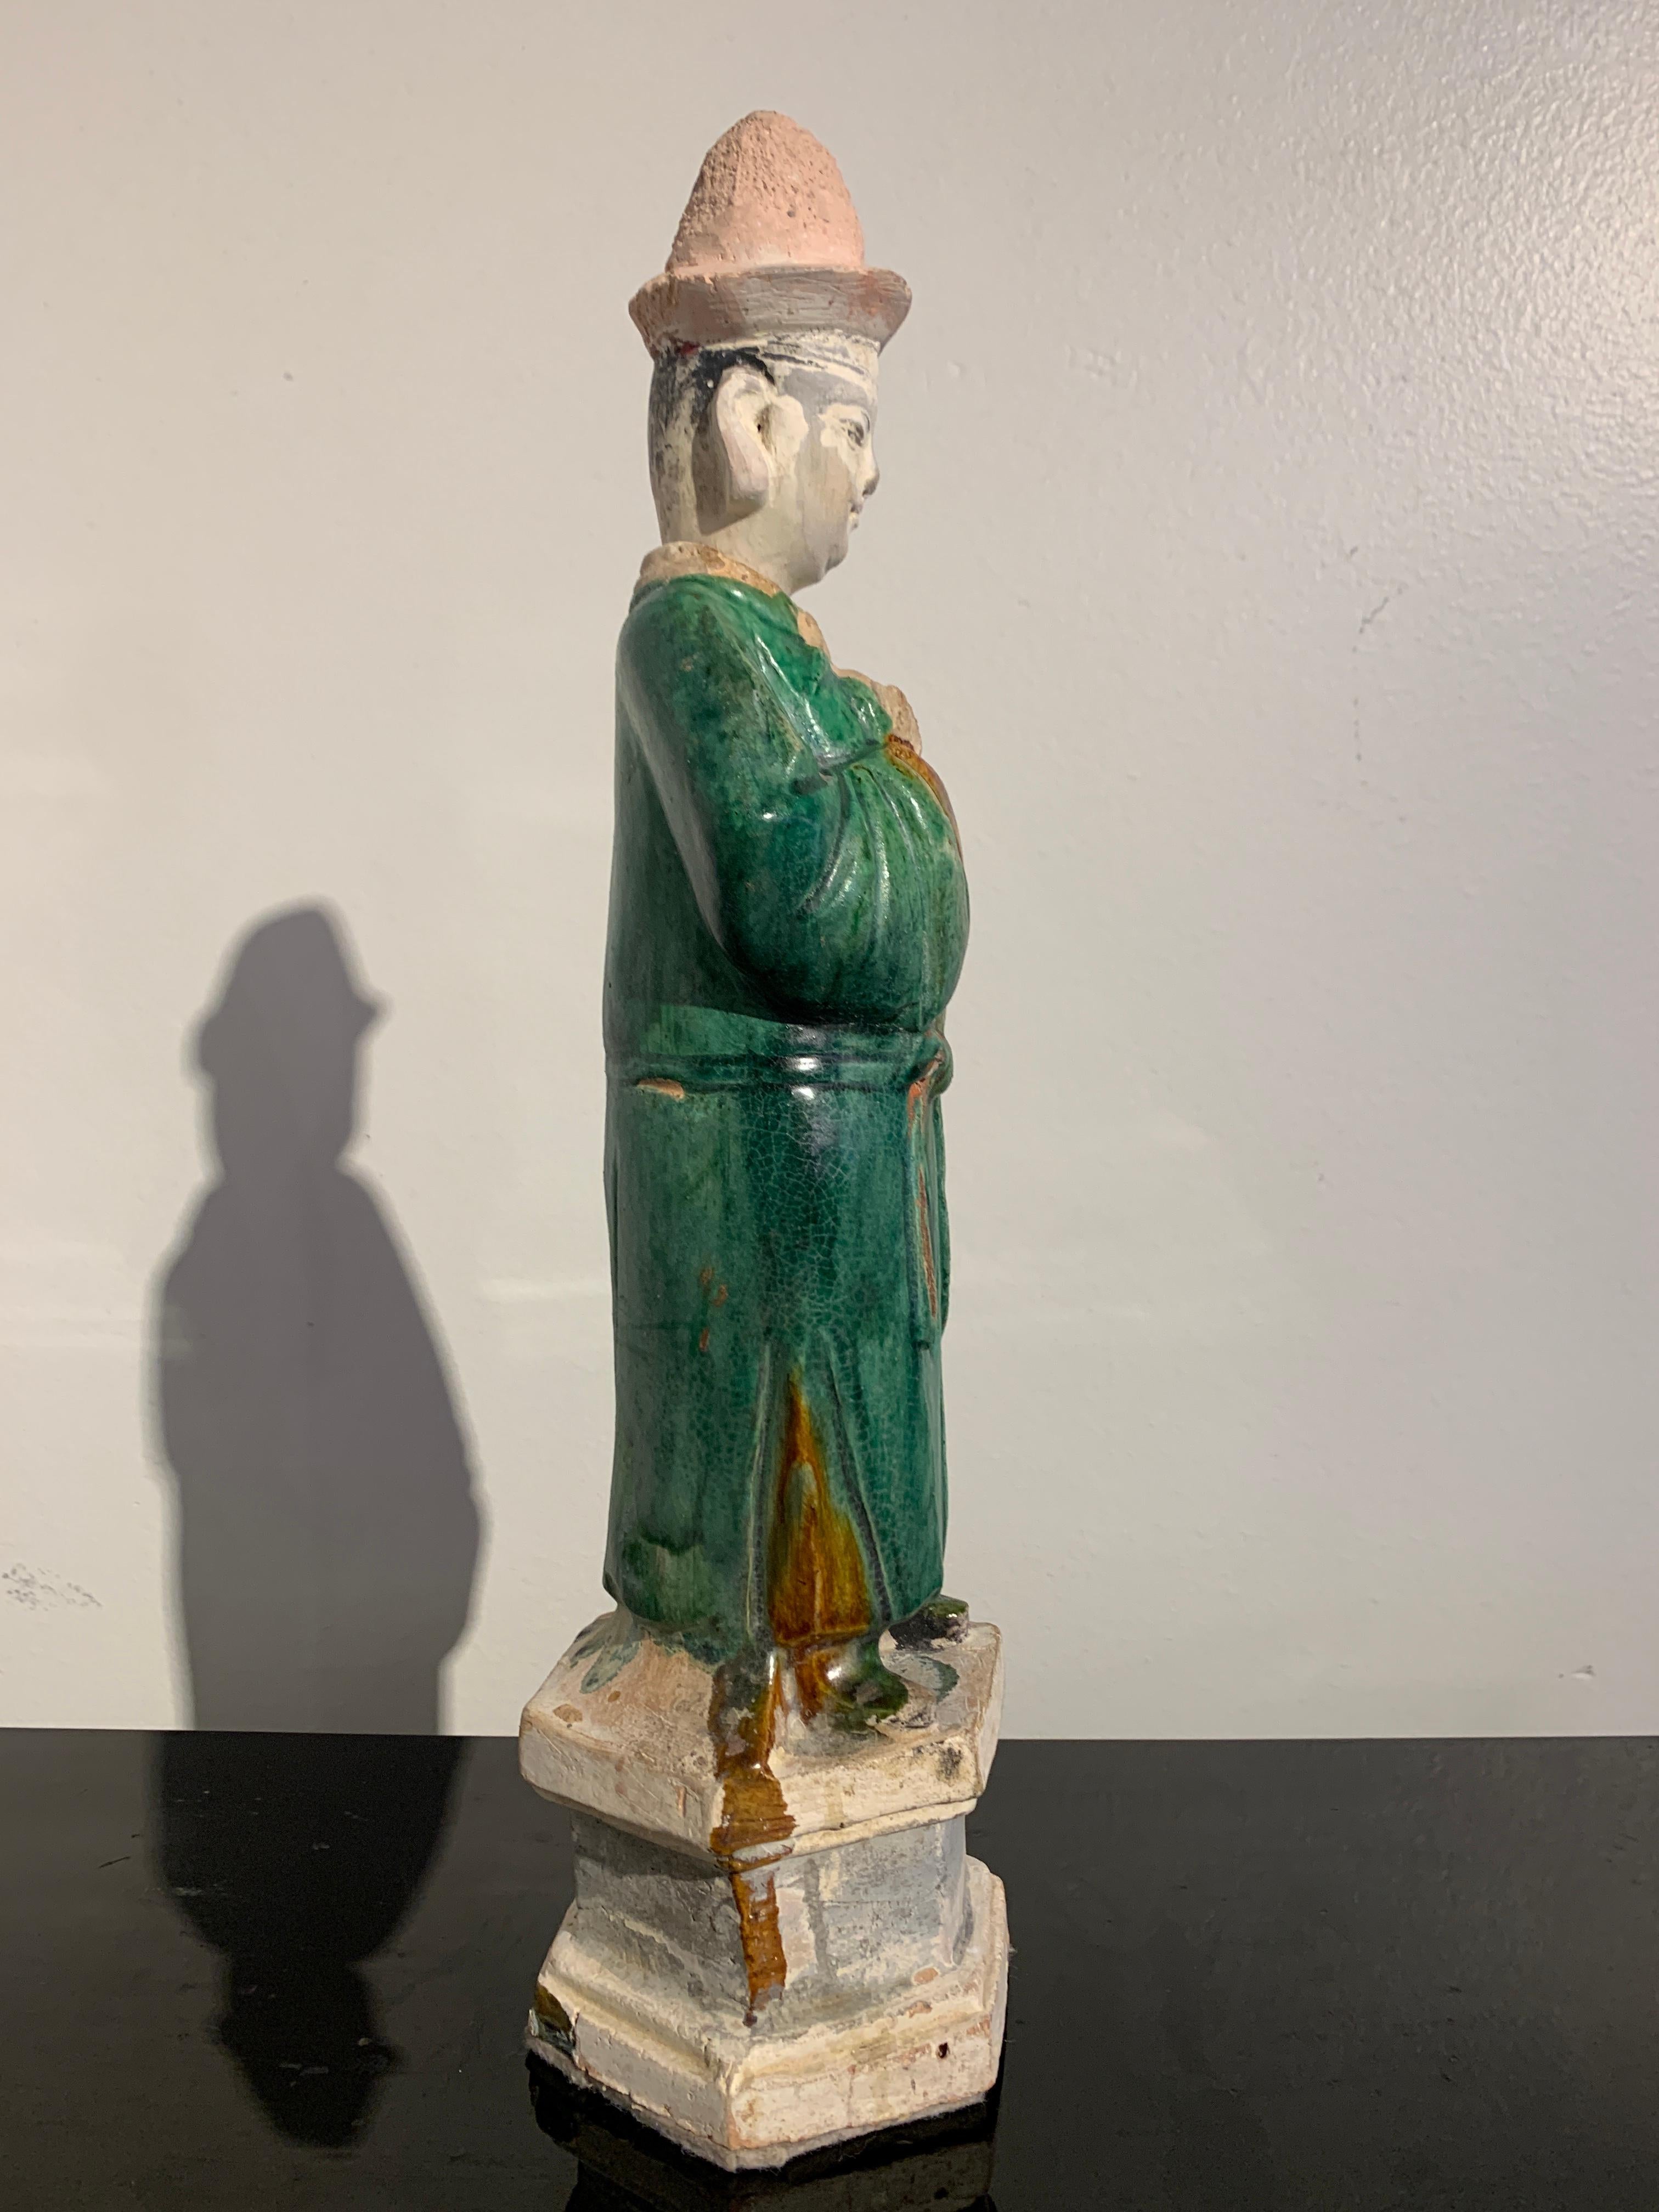 Cold-Painted Chinese Ming Dynasty Green Glazed Attendant Figure, 16th-17th Century, China